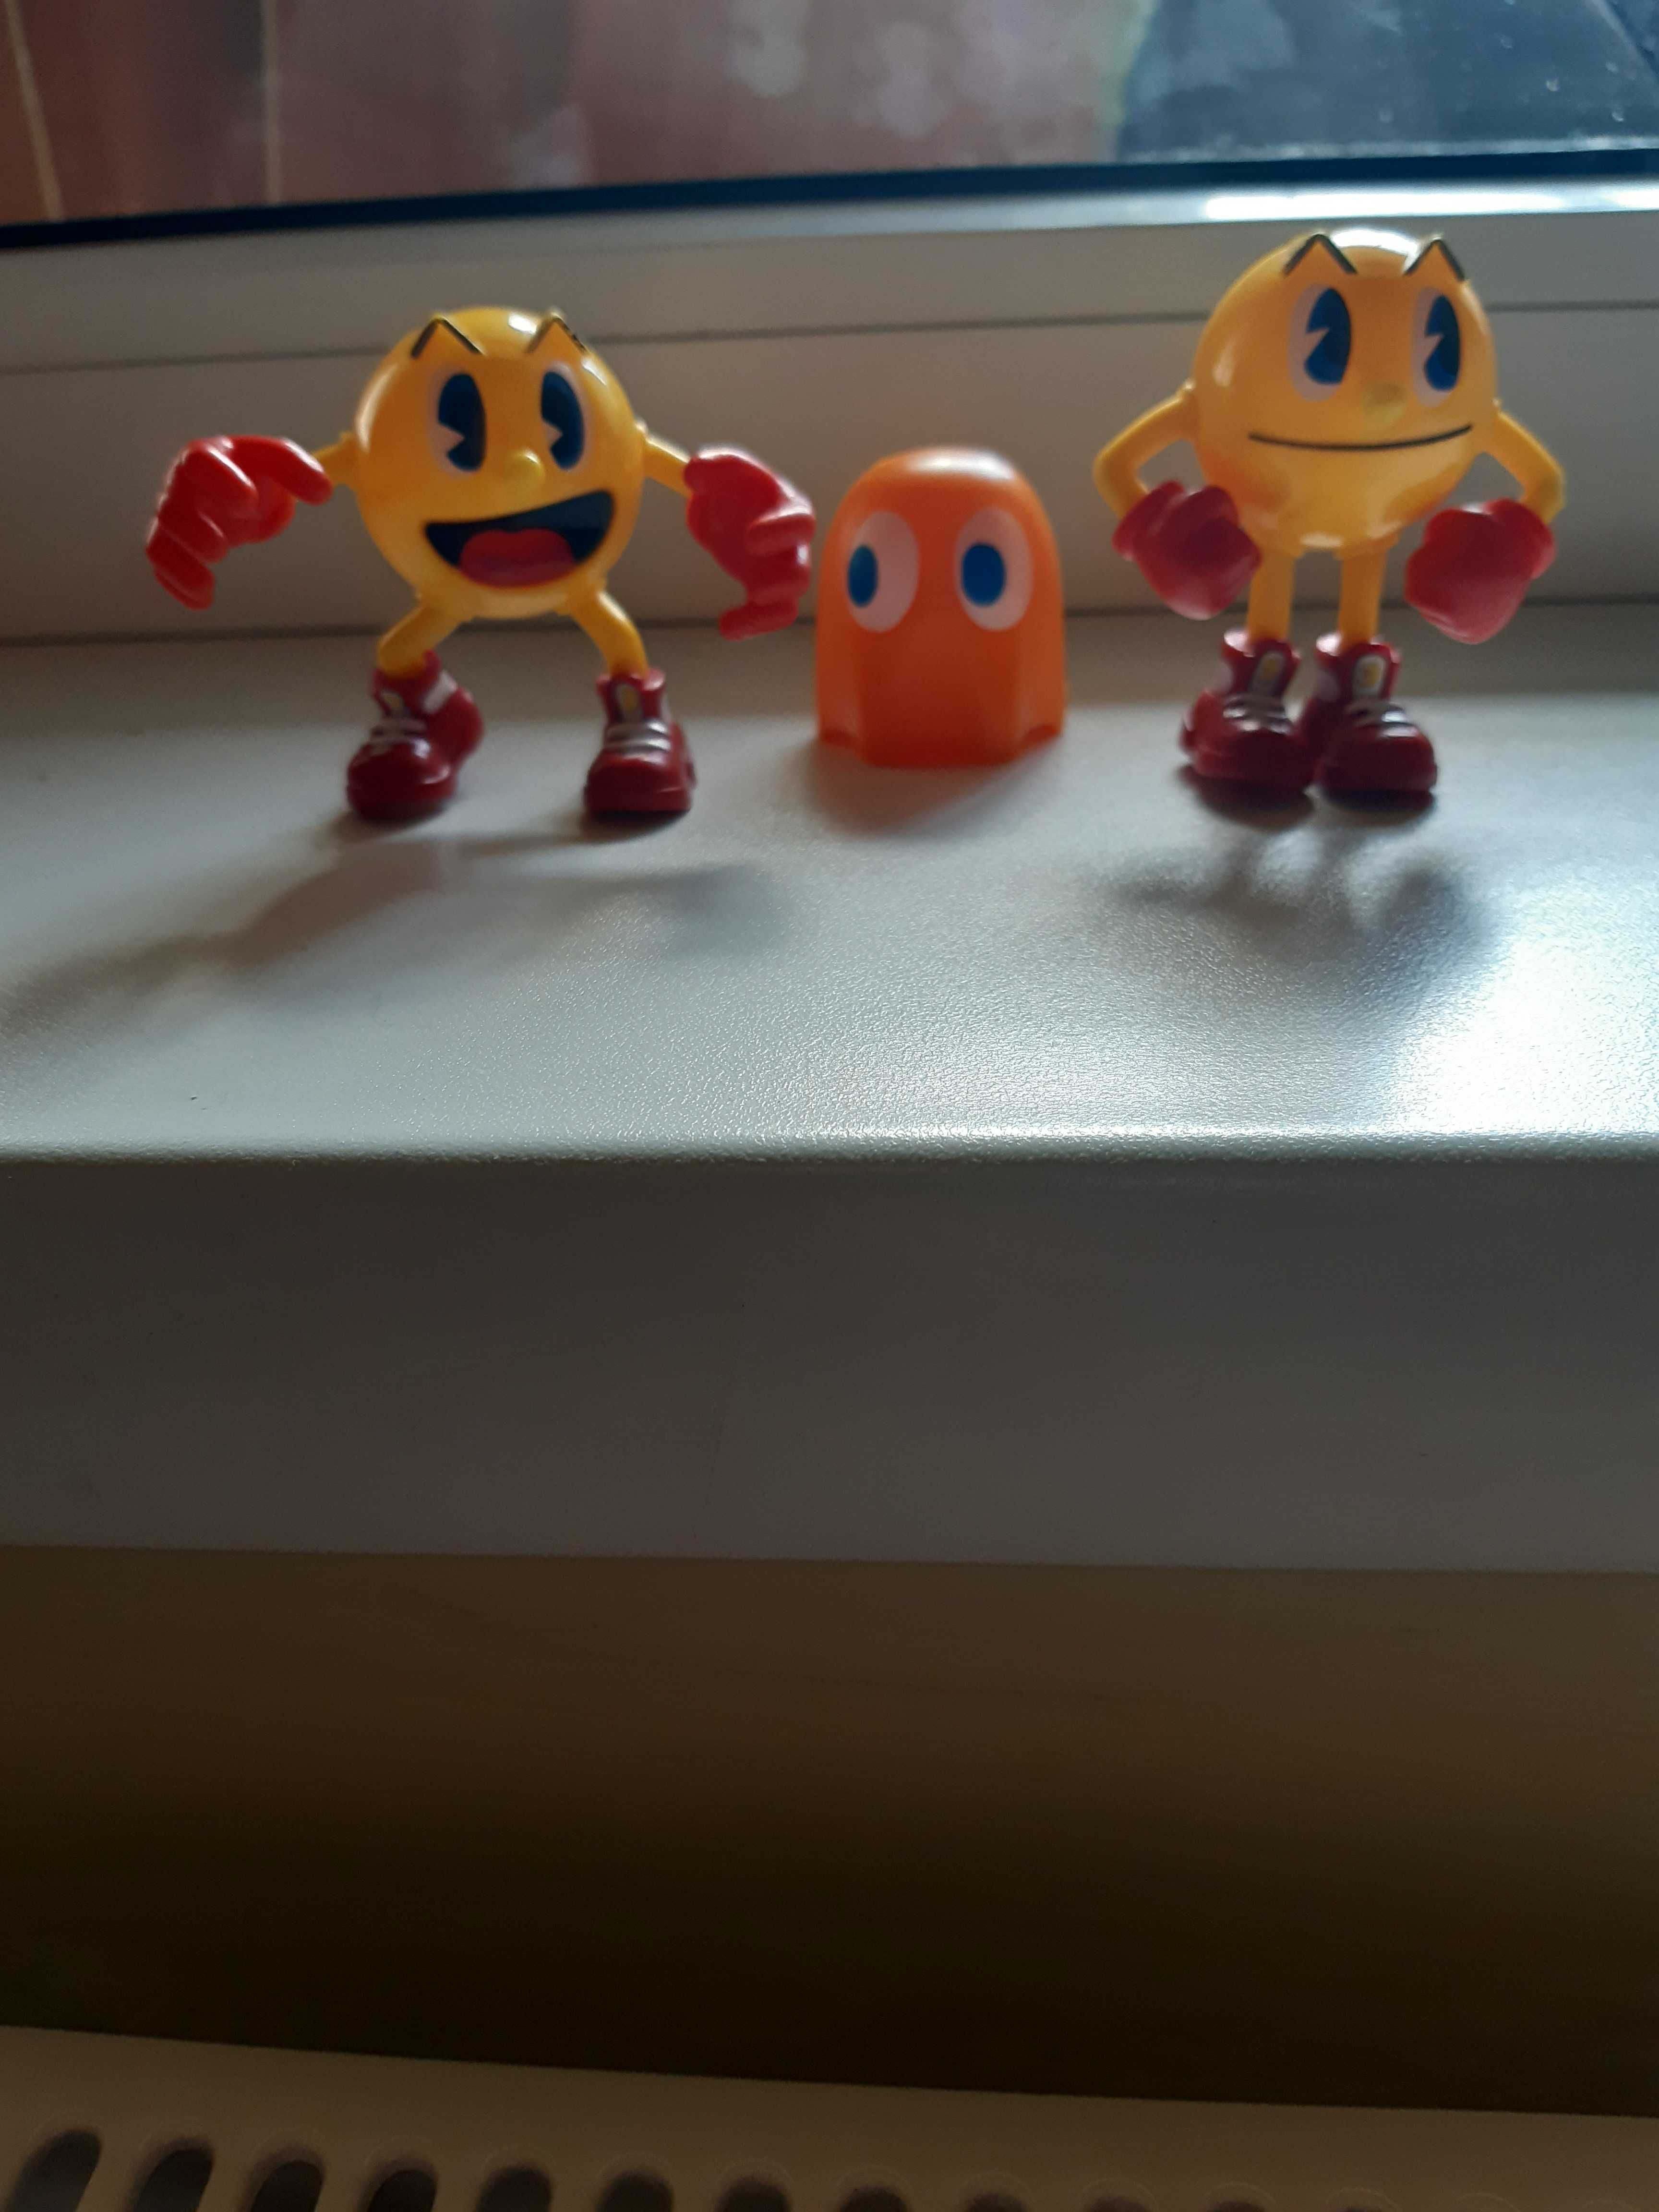 3 figurine Pac-man The Ghostly Adventures 2012 brand Bandai articulate